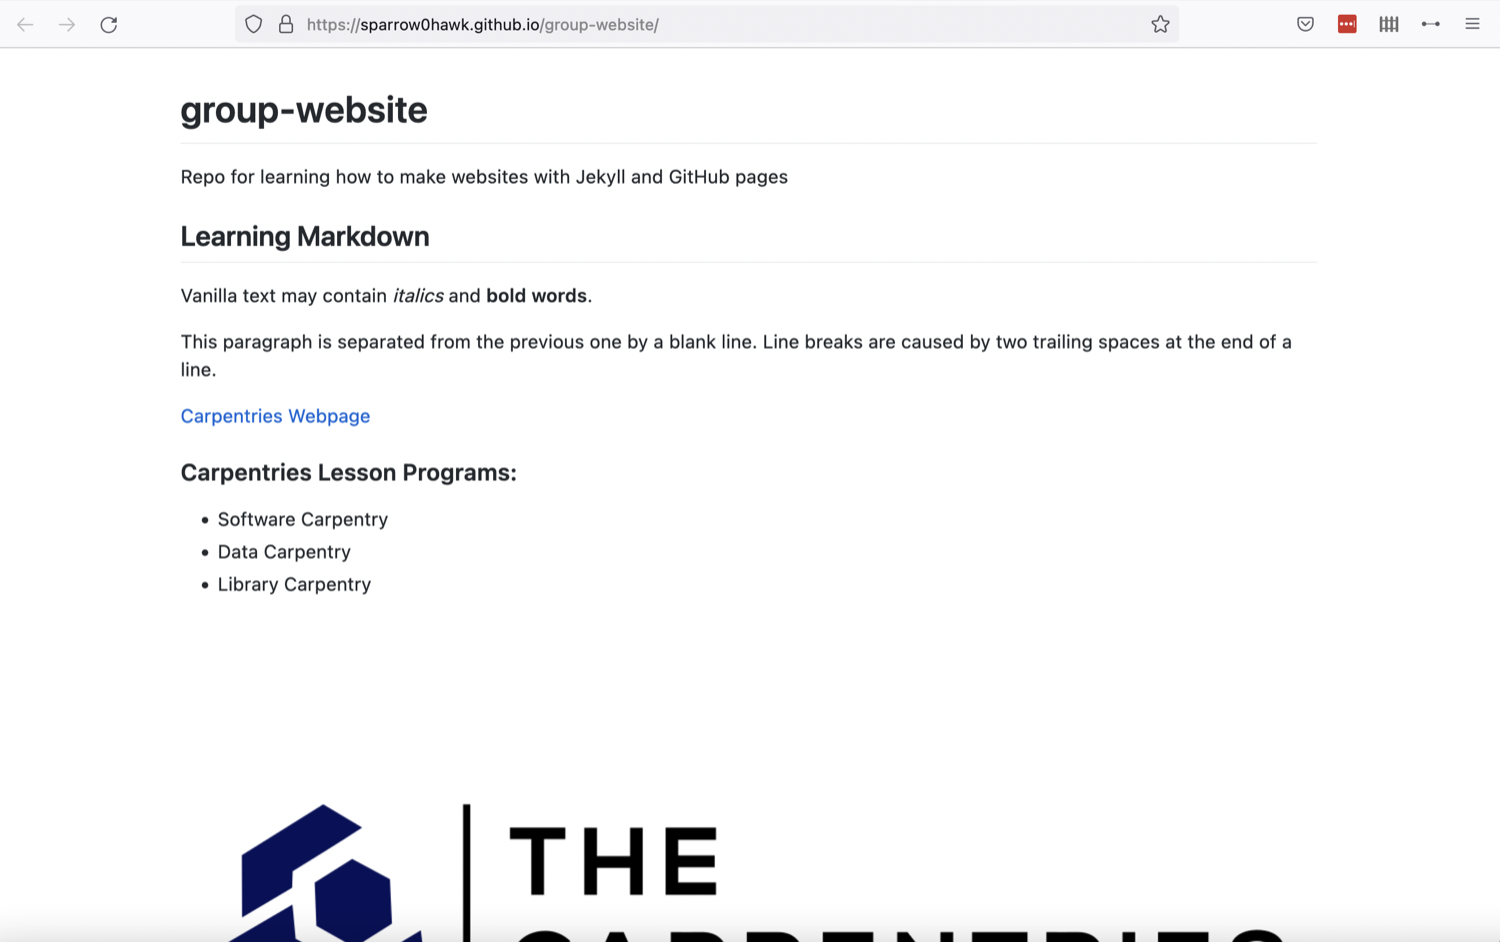 Our first website rendered by GitHub and showing the contents of README